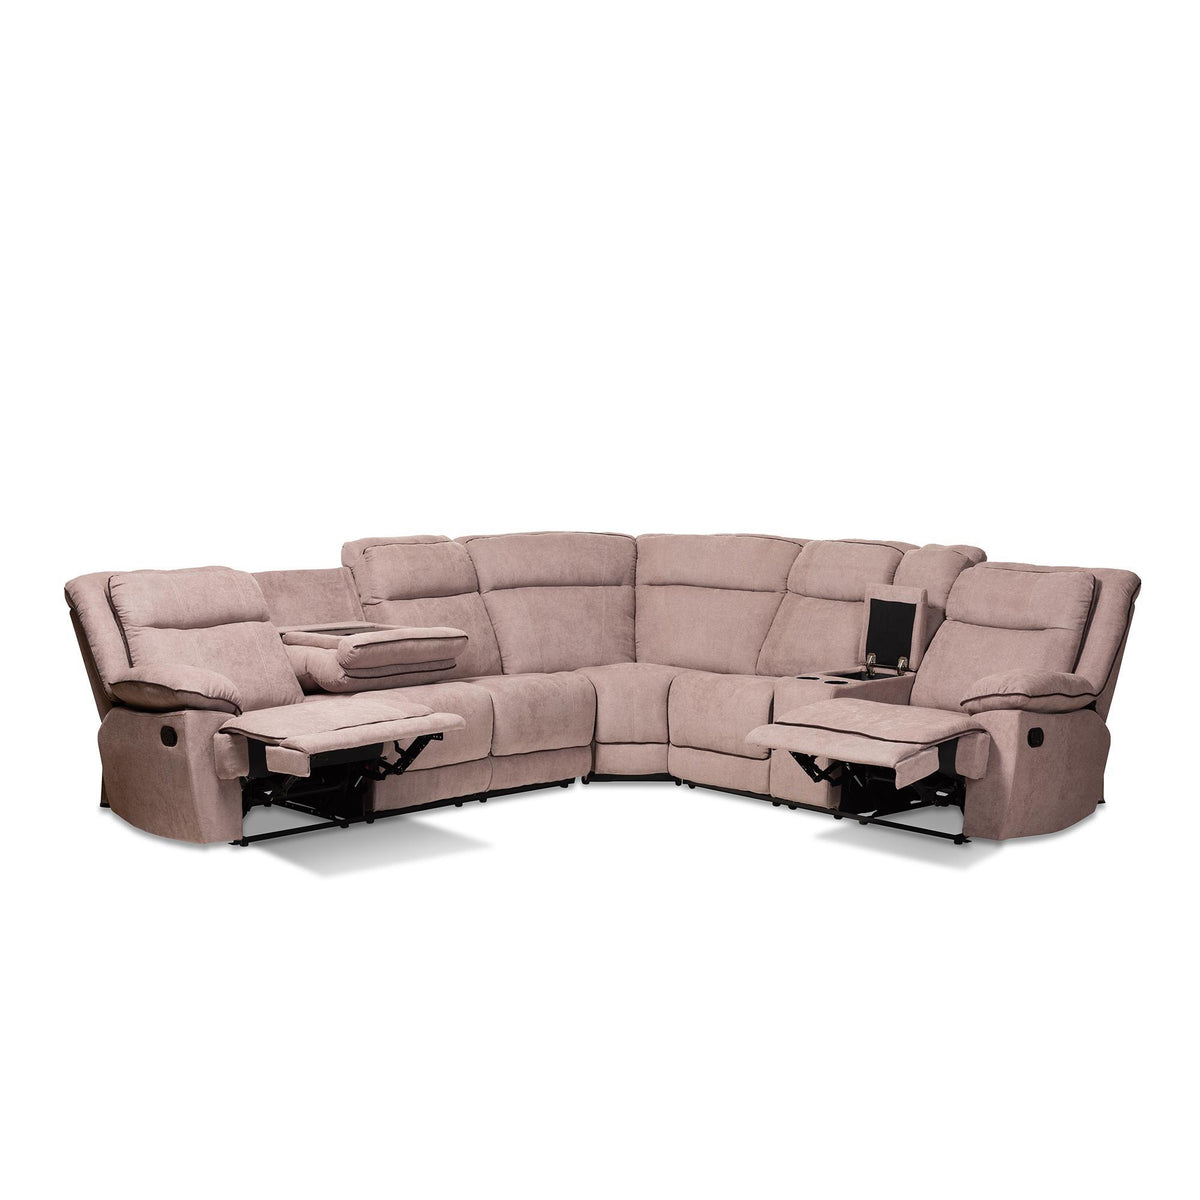 Baxton Studio Sabella Modern And Contemporary Taupe Fabric Upholstered 7-Piece Reclining Sectional - RX038A-Taupe-SF